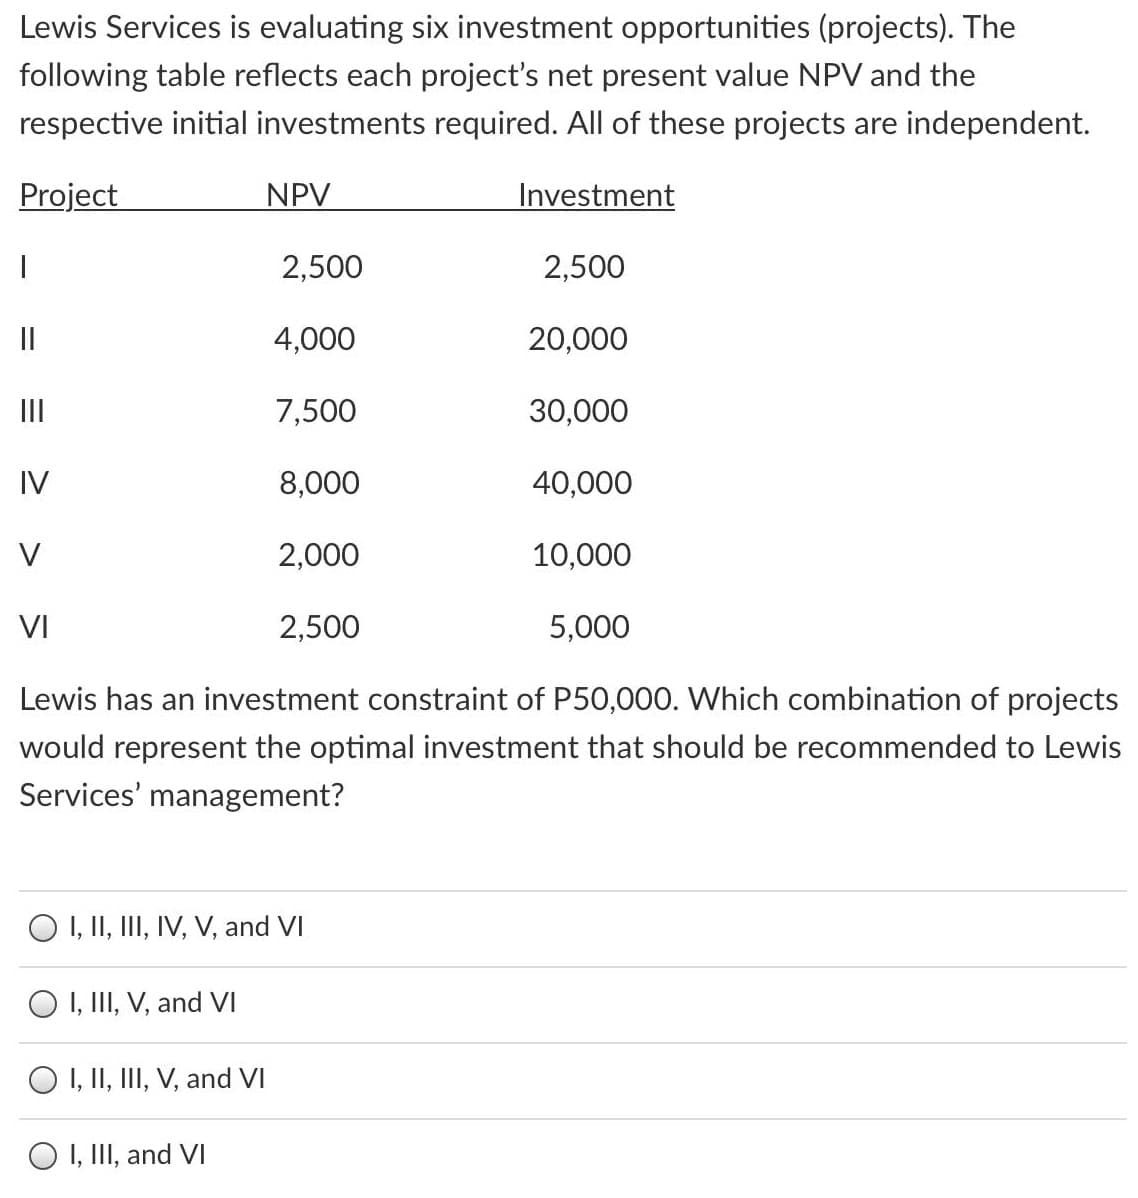 Lewis Services is evaluating six investment opportunities (projects). The
following table reflects each project's net present value NPV and the
respective initial investments required. All of these projects are independent.
Project
NPV
Investment
2,500
2,500
||
4,000
20,000
II
7,500
30,000
IV
8,000
40,000
V
2,000
10,000
VI
2,500
5,000
Lewis has an investment constraint of P50,000. Which combination of projects
would represent the optimal investment that should be recommended to Lewis
Services' management?
O I, II, III, IV, V, and VI
O I, III, V, and VI
O I, II, III, V, and VI
O I, III, and VI
